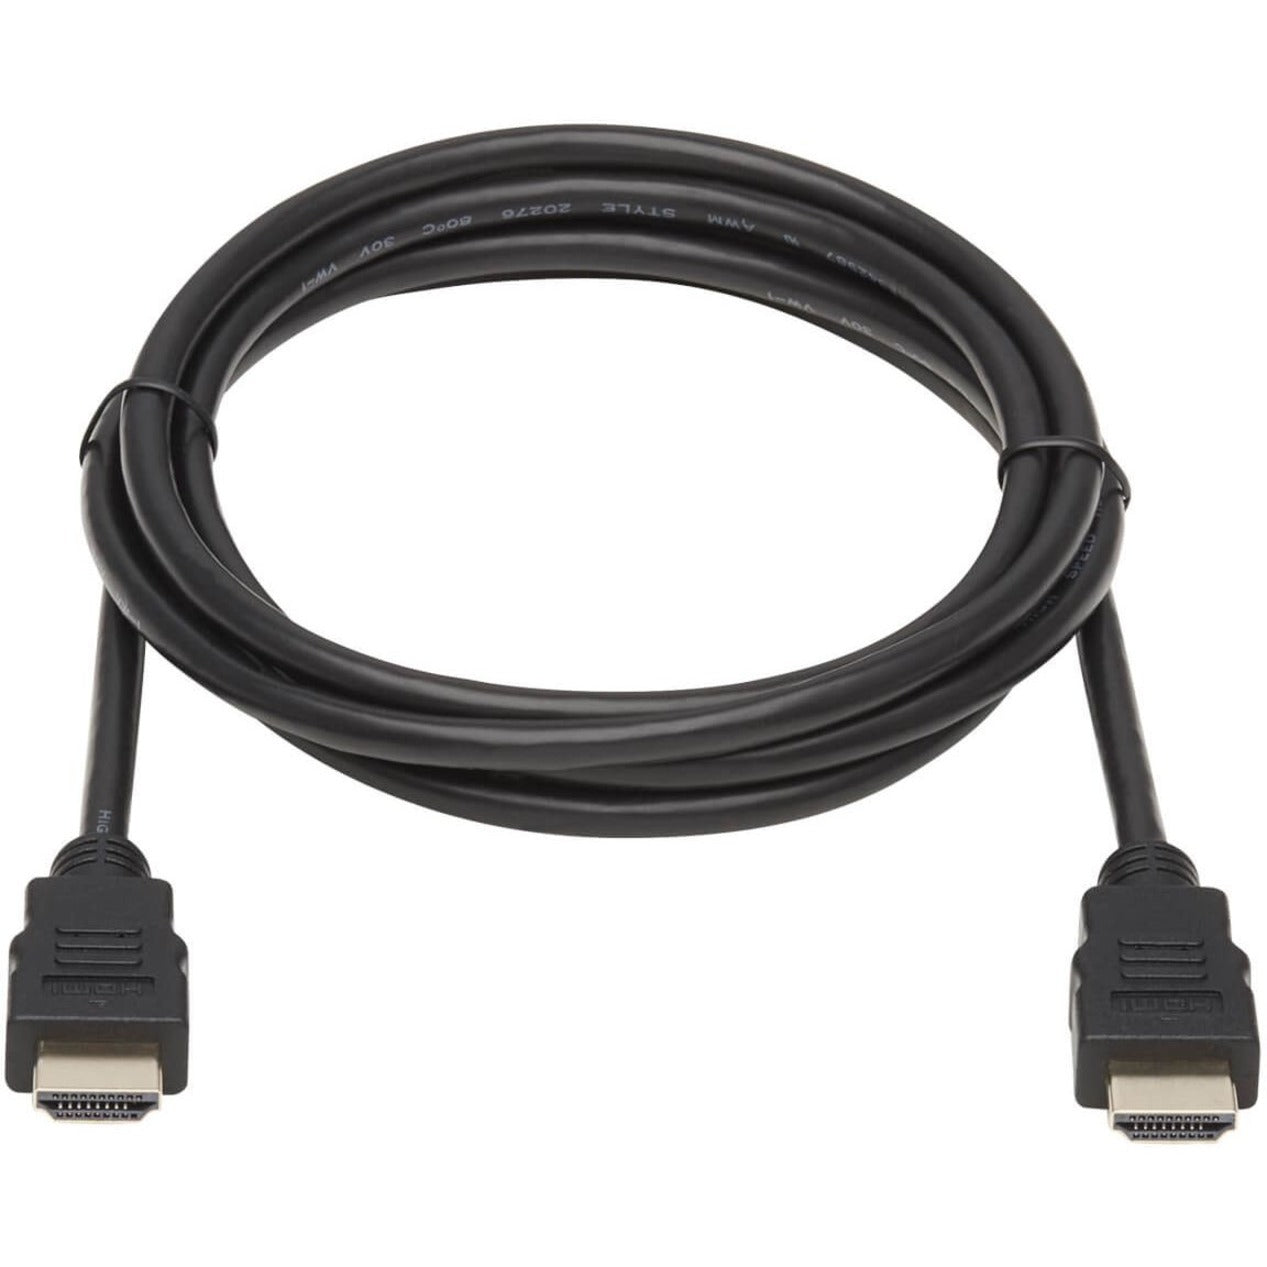 Tripp Lite P568-006 High Speed Audio/Video HDMI Cable, 6 ft, Black